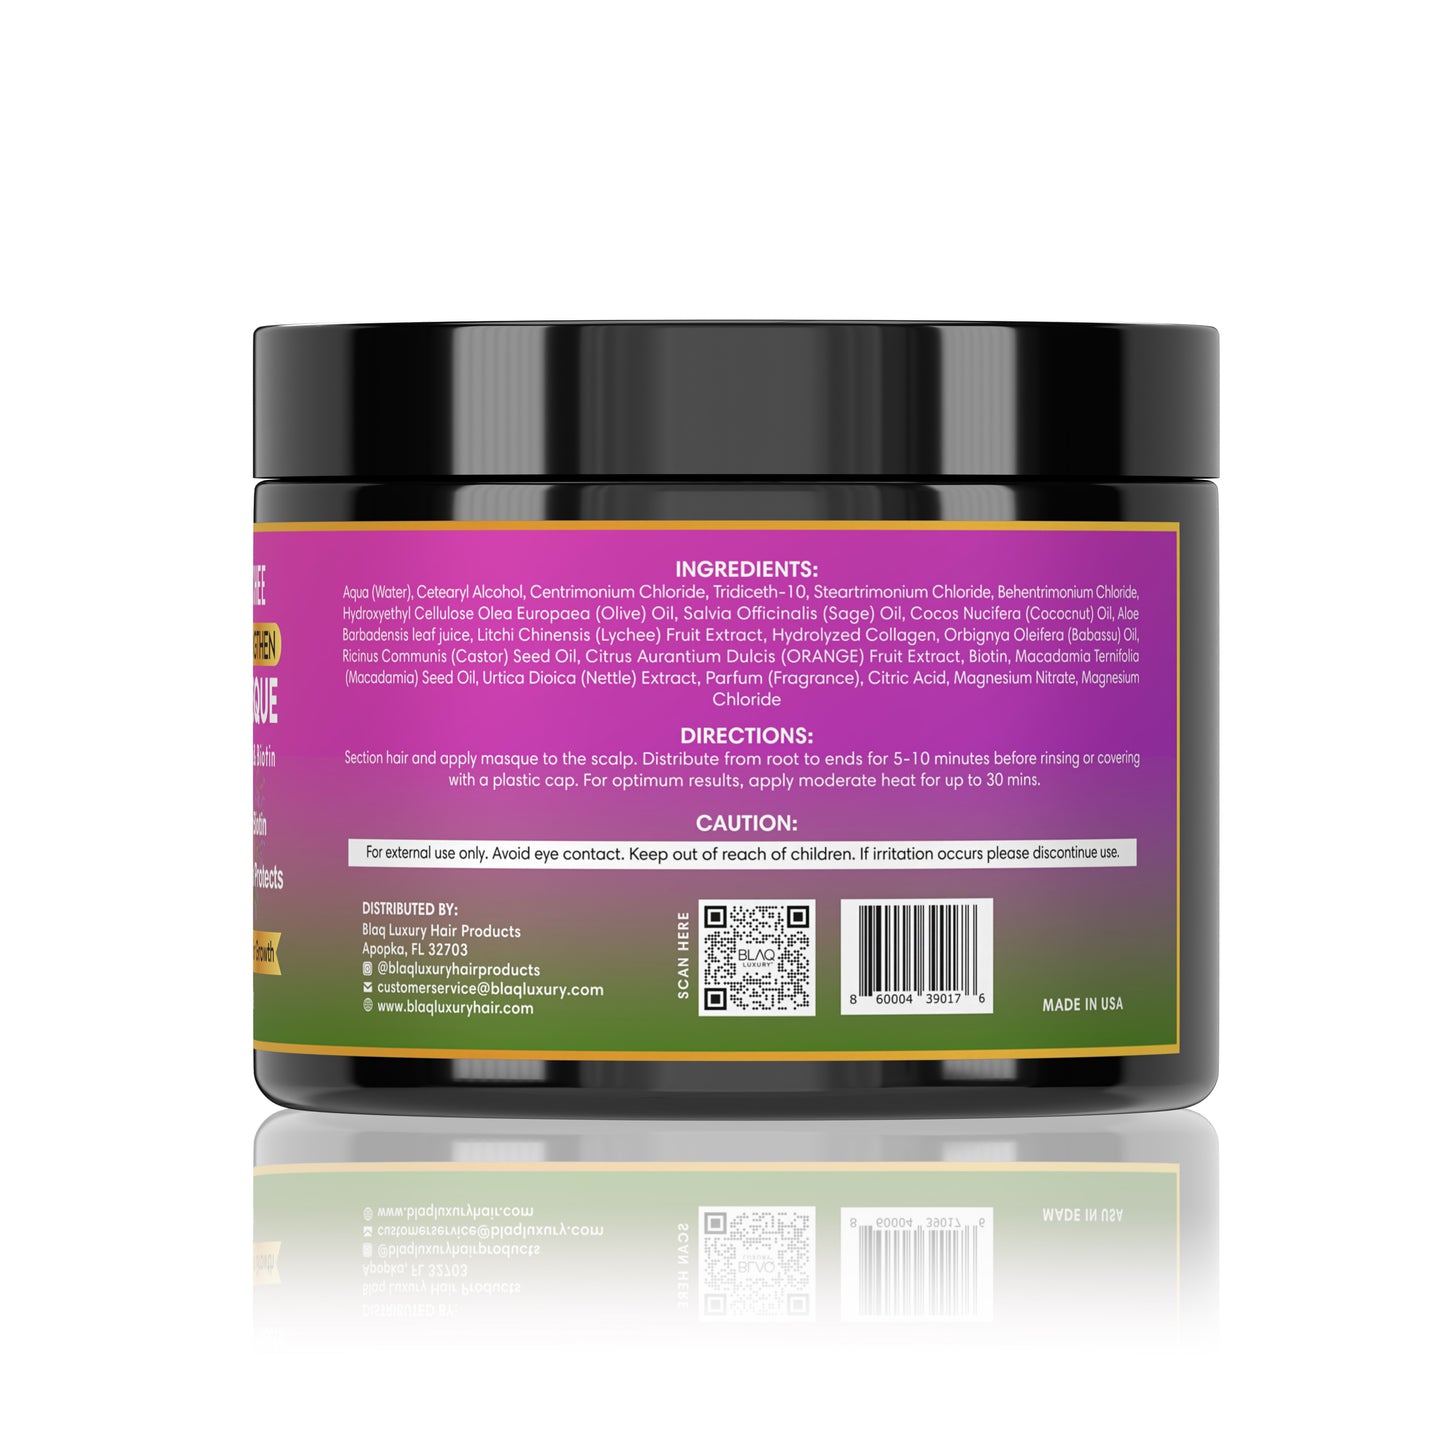 Sage & Lychee Repair and Strengthen Hair Masque